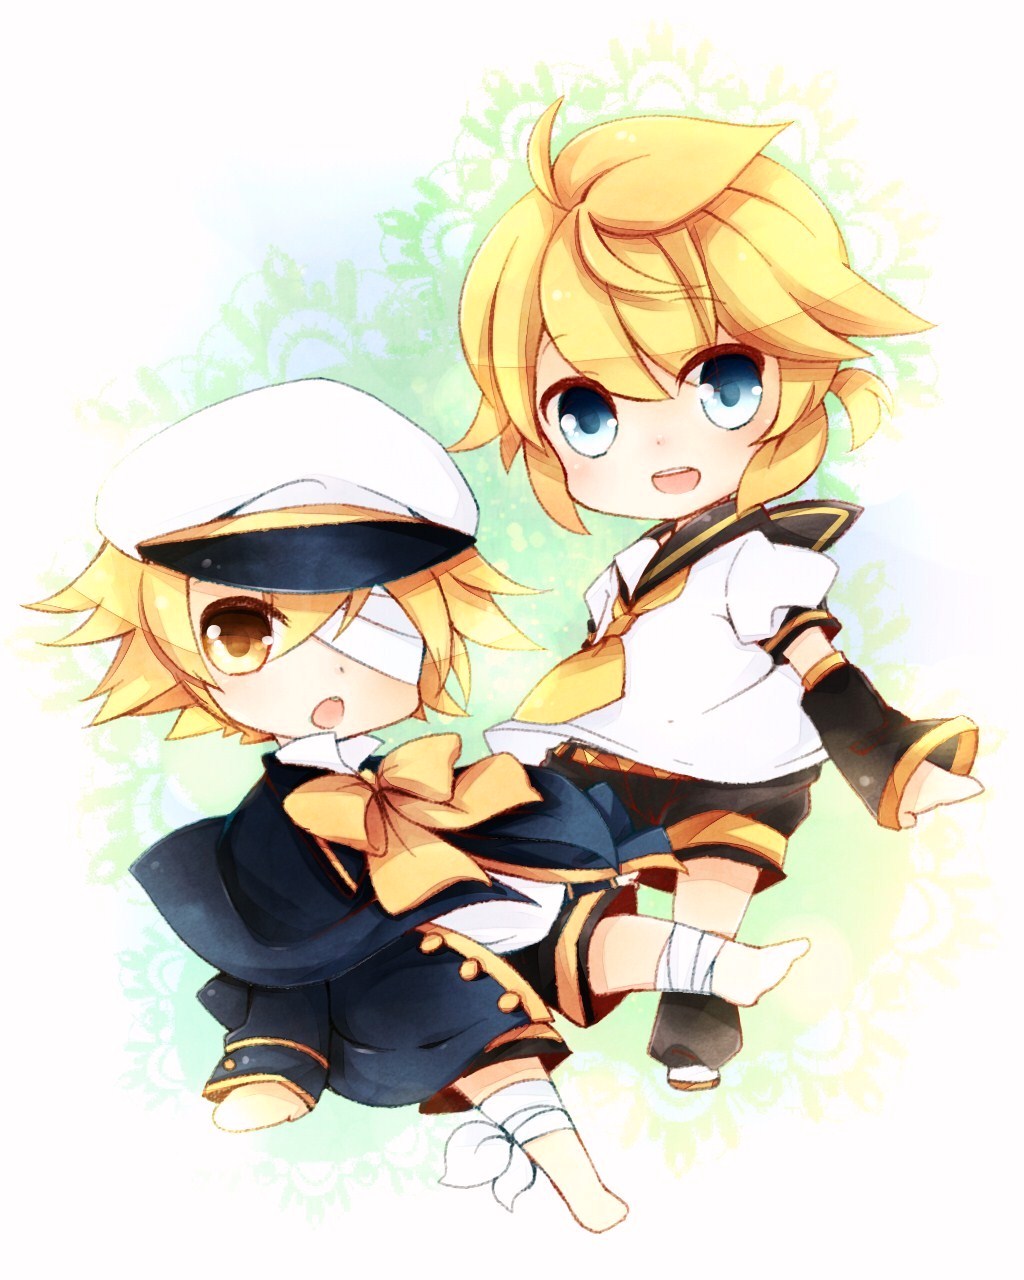 Oliver and Kagamine Len by Sum.